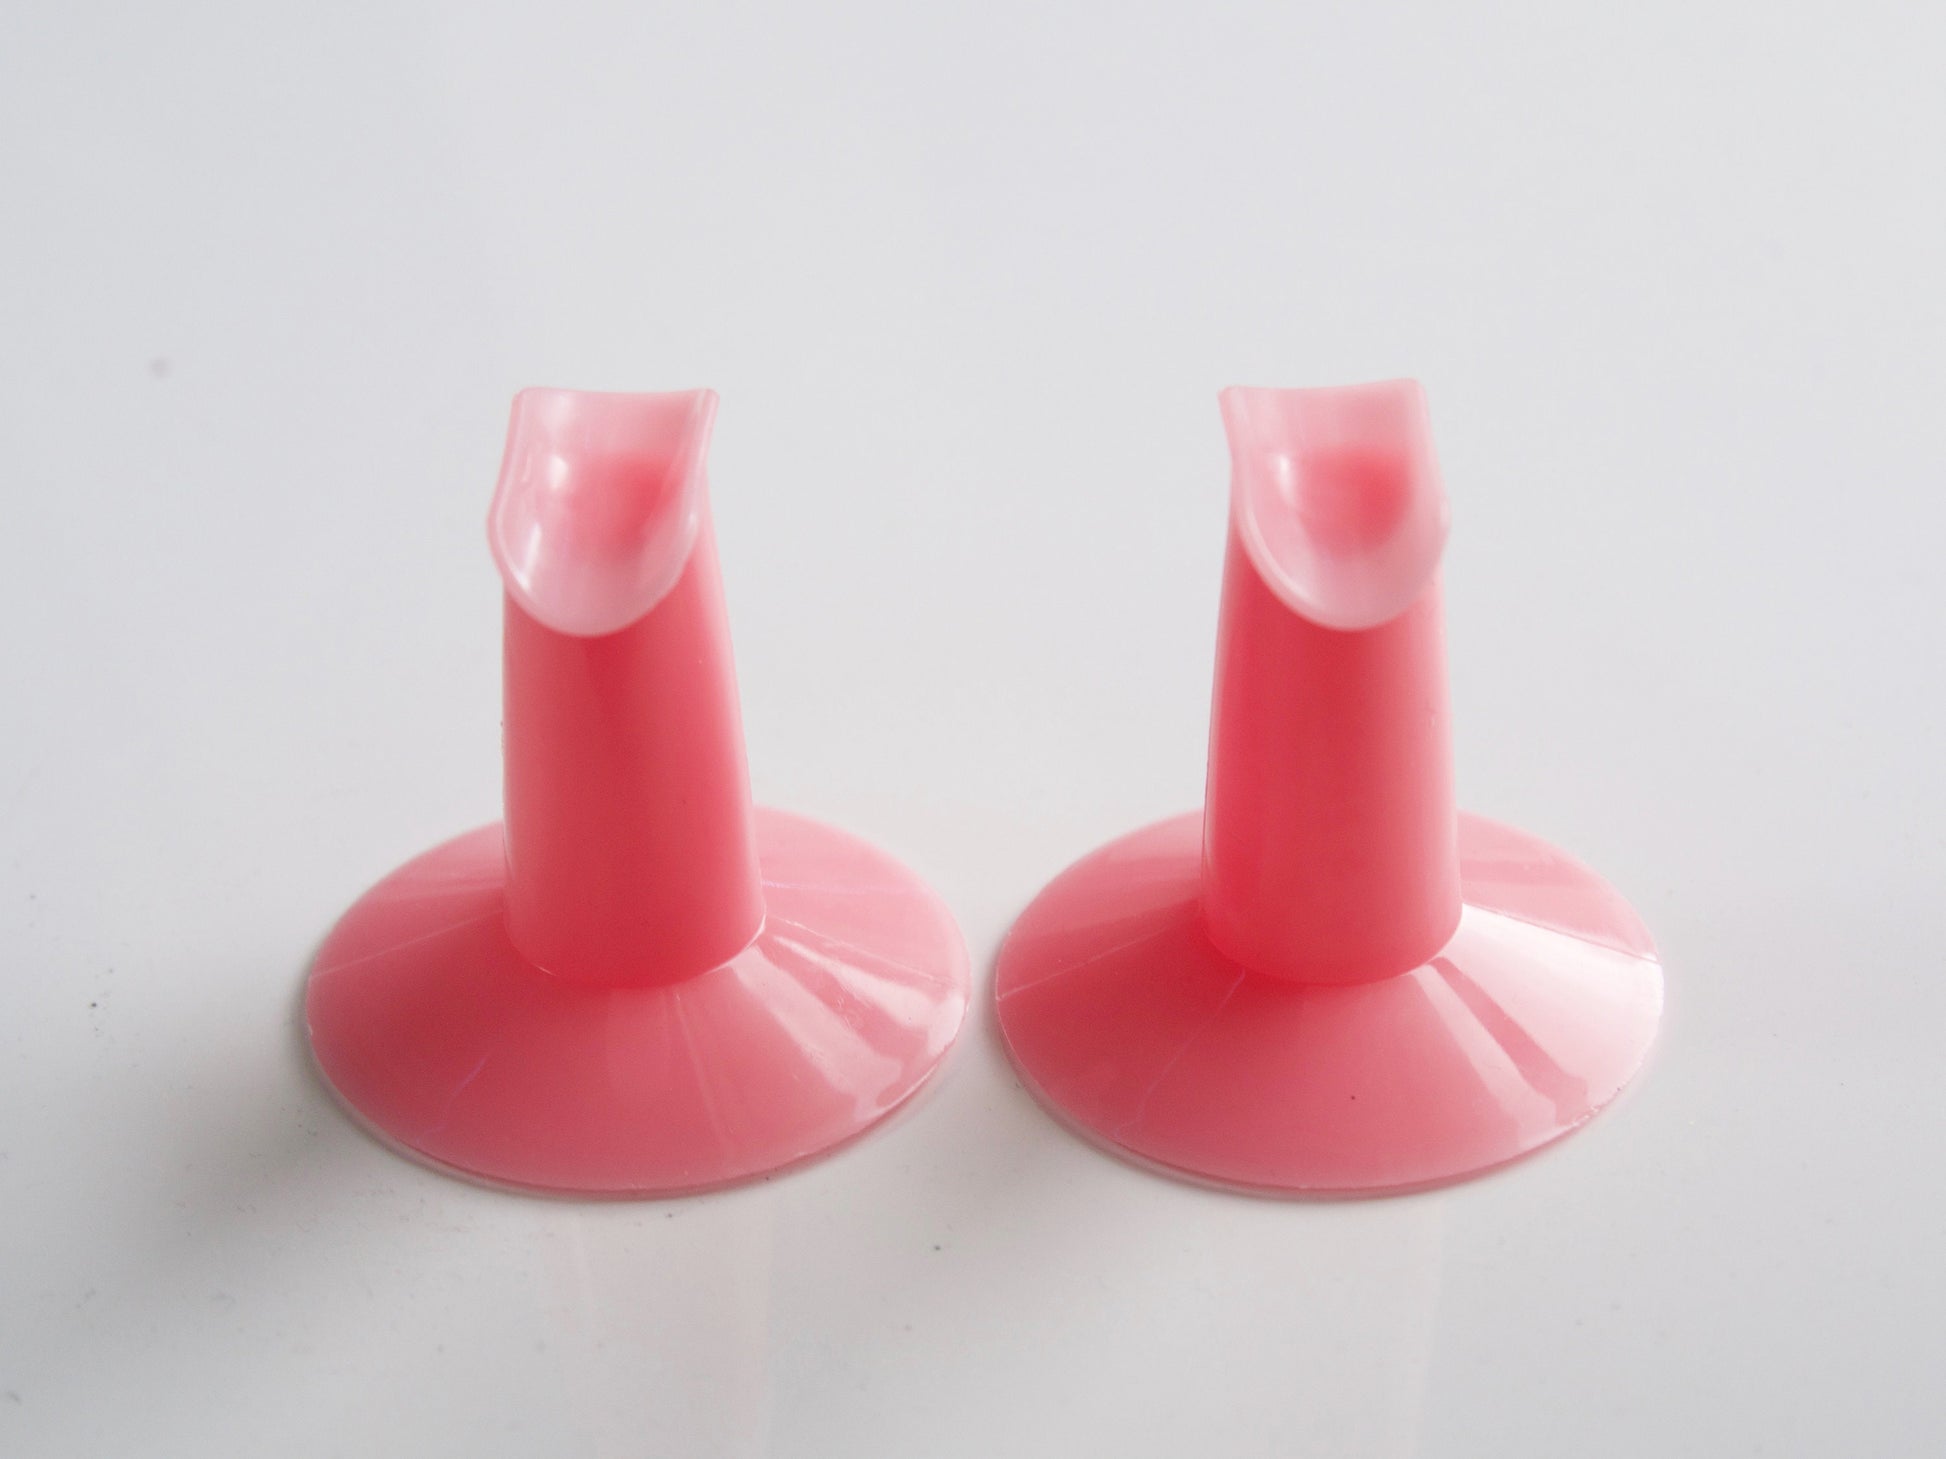 2pcs Plastic Finger Stand Support Stabilized Holder/ Fingers Rest Holder for Nail Art Design Nail Technician Painting tool Nail polish